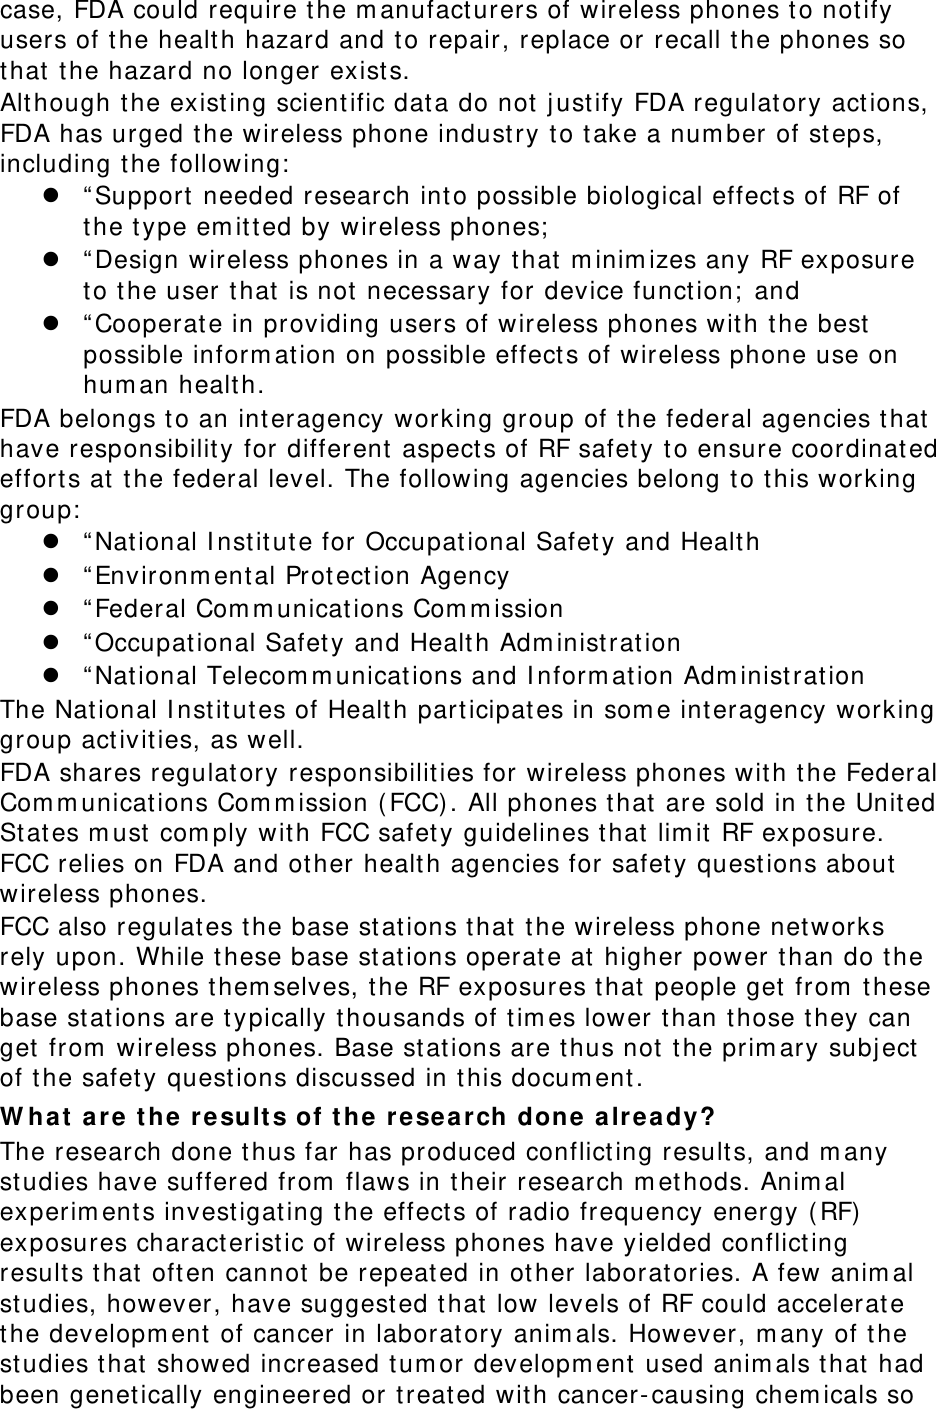 case, FDA could require t he m anufact urers of wireless phones to notify users of t he health hazard and t o repair, replace or recall t he phones so that the hazard no longer exist s. Alt hough the existing scientific data do not j ust ify FDA regulat ory act ions, FDA has urged t he wireless phone indust ry to t ake a num ber of st eps, including t he following:  z “ Support  needed research int o possible biological effect s of RF of the type em itted by wireless phones;  z “ Design wireless phones in a way t hat m inim izes any RF exposure to t he user t hat is not  necessary for device funct ion;  and z “ Cooperate in providing users of wireless phones wit h t he best  possible inform ation on possible effect s of wireless phone use on hum an healt h. FDA belongs to an int eragency working group of t he federal agencies t hat have responsibility for different  aspects of RF safet y to ensure coordinated effort s at the federal level. The following agencies belong to t his working group:  z “ Nat ional I nstitut e for Occupational Safet y and Healt h z “ Environm ent al Prot ect ion Agency z “ Federal Com m unications Com m ission z “ Occupational Safet y and Health Adm inistrat ion z “ Nat ional Telecom m unicat ions and I nform ation Adm inistration The National I nst itut es of Health participat es in som e int eragency working group act ivities, as well. FDA shares regulat ory responsibilities for wireless phones wit h t he Federal Com m unications Com m ission ( FCC). All phones that are sold in t he United St ates m ust  com ply with FCC safet y guidelines t hat  lim it RF exposure. FCC relies on FDA and other health agencies for safety quest ions about  wireless phones. FCC also regulat es the base stat ions t hat t he wireless phone networks rely upon. While t hese base stat ions operate at higher power t han do t he wireless phones them selves, t he RF exposures t hat people get  from  t hese base stat ions are t ypically t housands of t im es lower t han t hose t hey can get  from  wireless phones. Base st ations are thus not  t he prim ary subj ect  of t he safet y quest ions discussed in this docum ent. W hat  a re t he re sult s of t he resea rch done  alre a dy? The research done t hus far has produced conflicting results, and m any studies have suffered from  flaws in their research m et hods. Anim al experim ents invest igat ing t he effect s of radio frequency energy ( RF)  exposures characteristic of wireless phones have yielded conflict ing results that often cannot be repeated in other laboratories. A few anim al studies, however, have suggested that low levels of RF could accelerat e the developm ent  of cancer in laboratory anim als. However, m any of t he studies t hat  showed increased tum or developm ent used anim als t hat had been genet ically engineered or t reat ed wit h cancer-causing chem icals so 